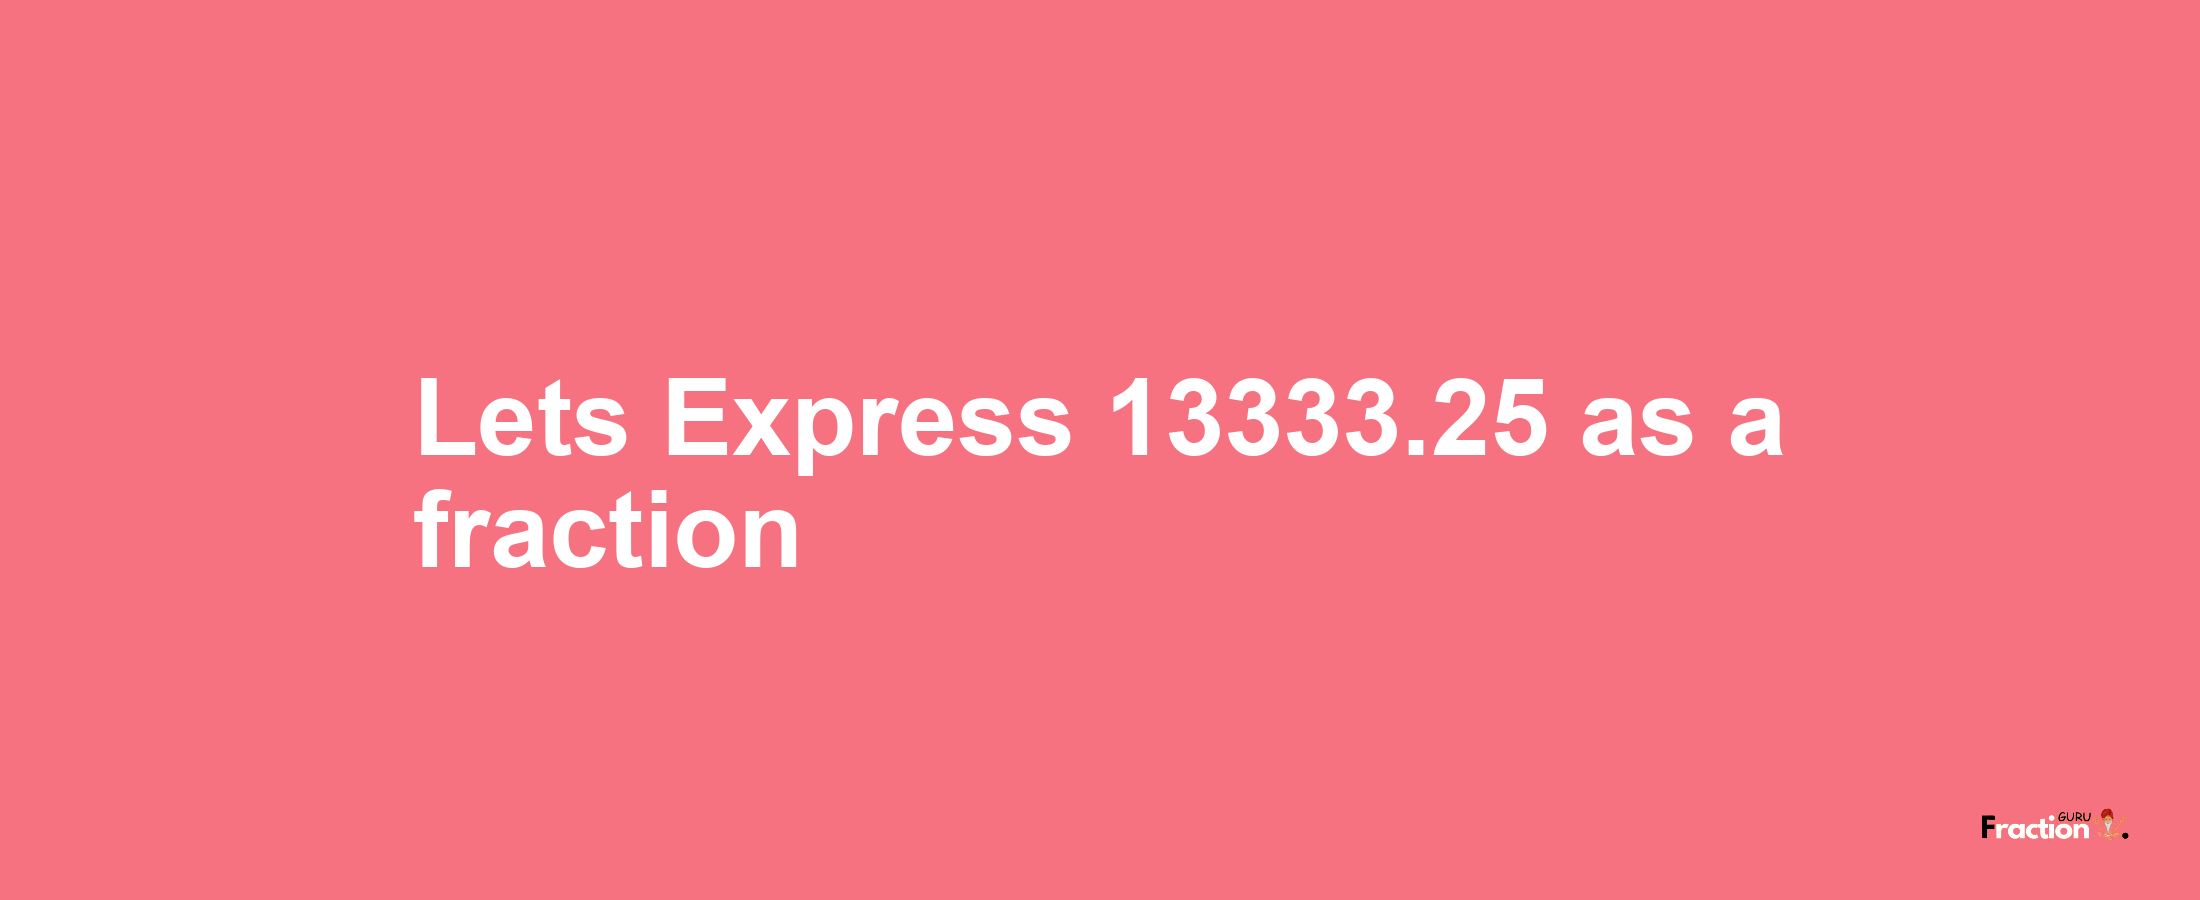 Lets Express 13333.25 as afraction